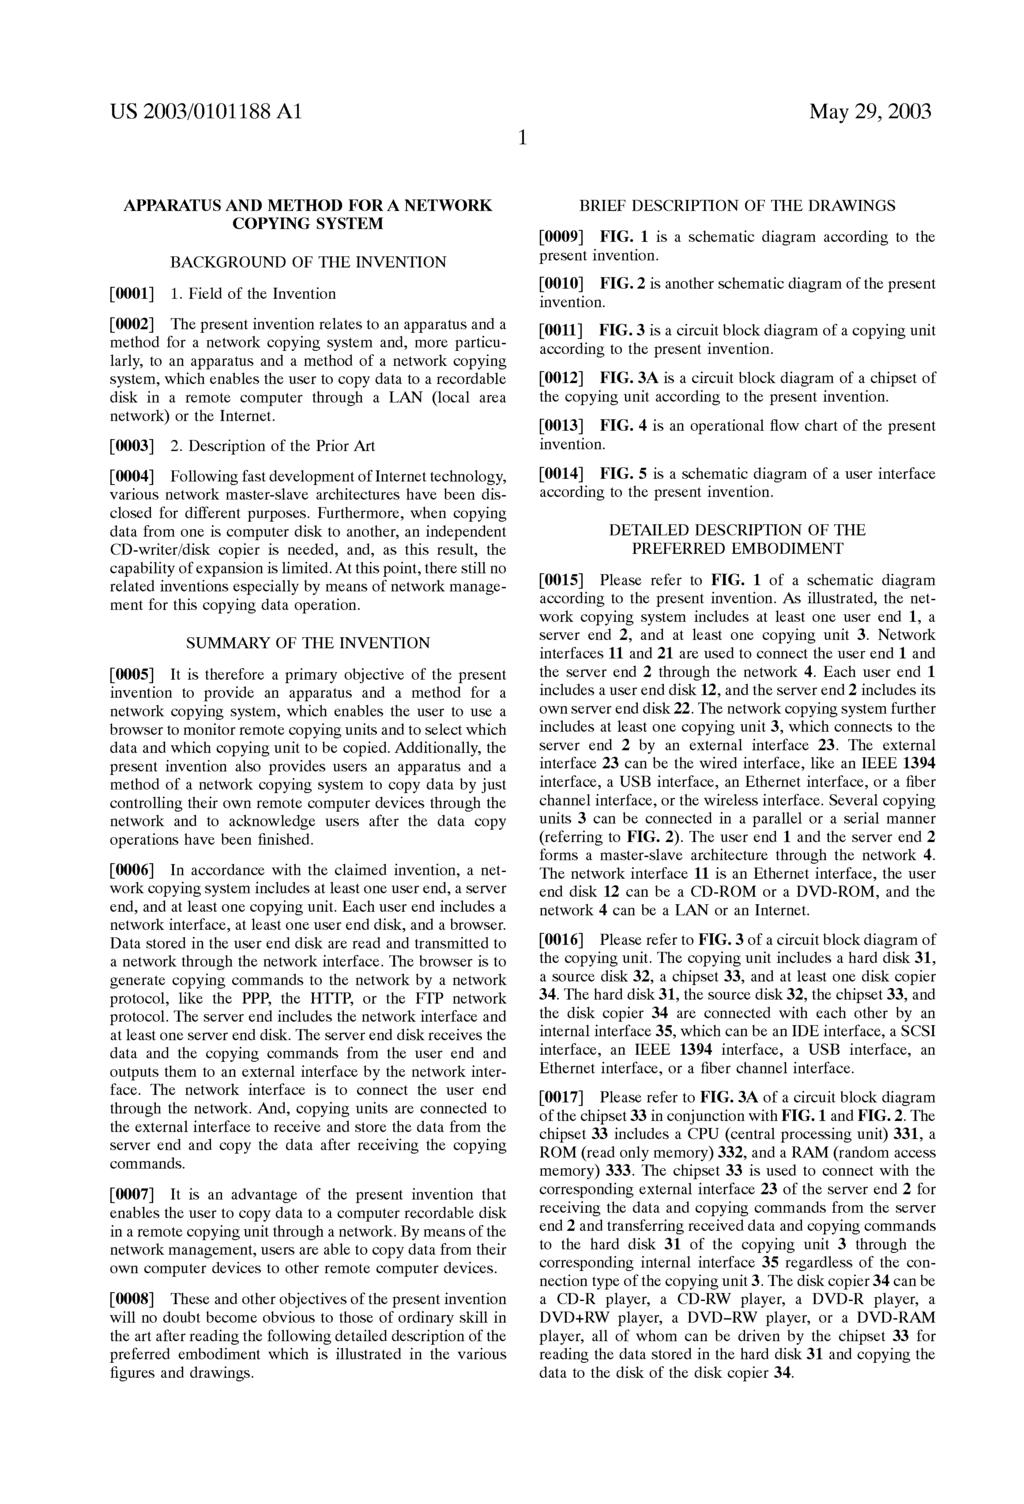 US 2003/0101188A1 May 29, 2003 APPARATUS AND METHOD FOR A NETWORK COPYING SYSTEM BACKGROUND OF THE INVENTION 0001) 1.